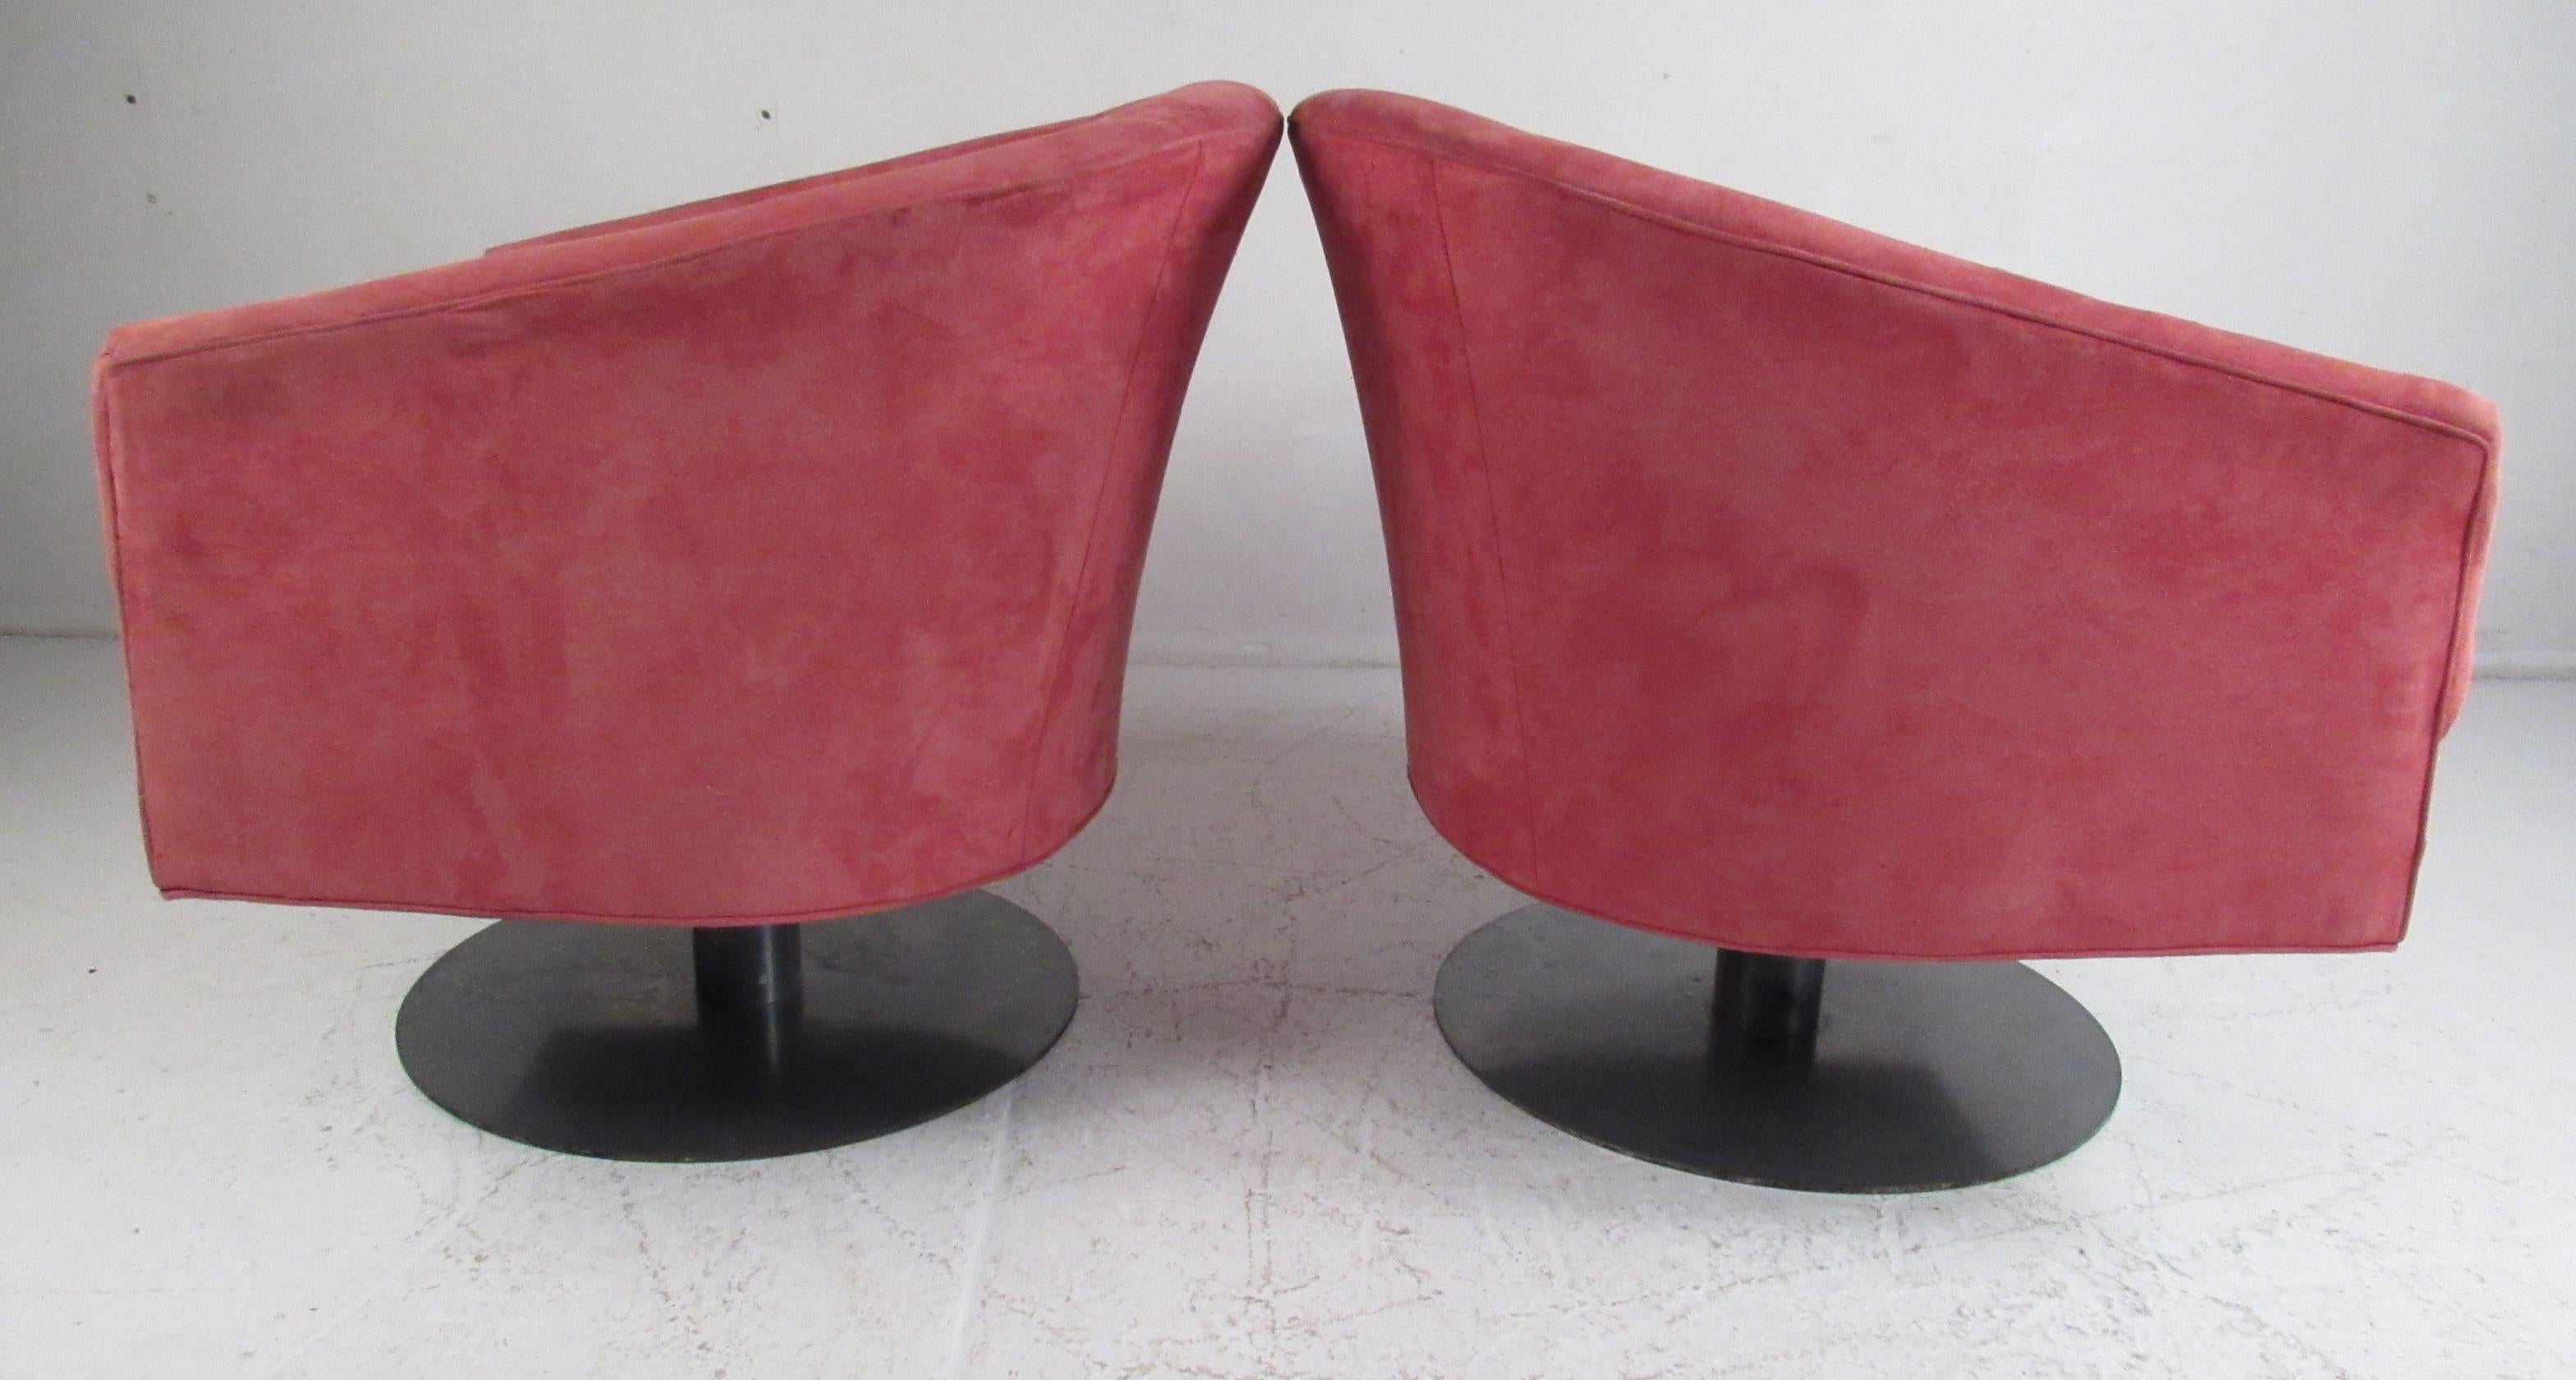 Mid-Century Modern Pair of Contemporary Modern Swivel Lounge Chairs For Sale